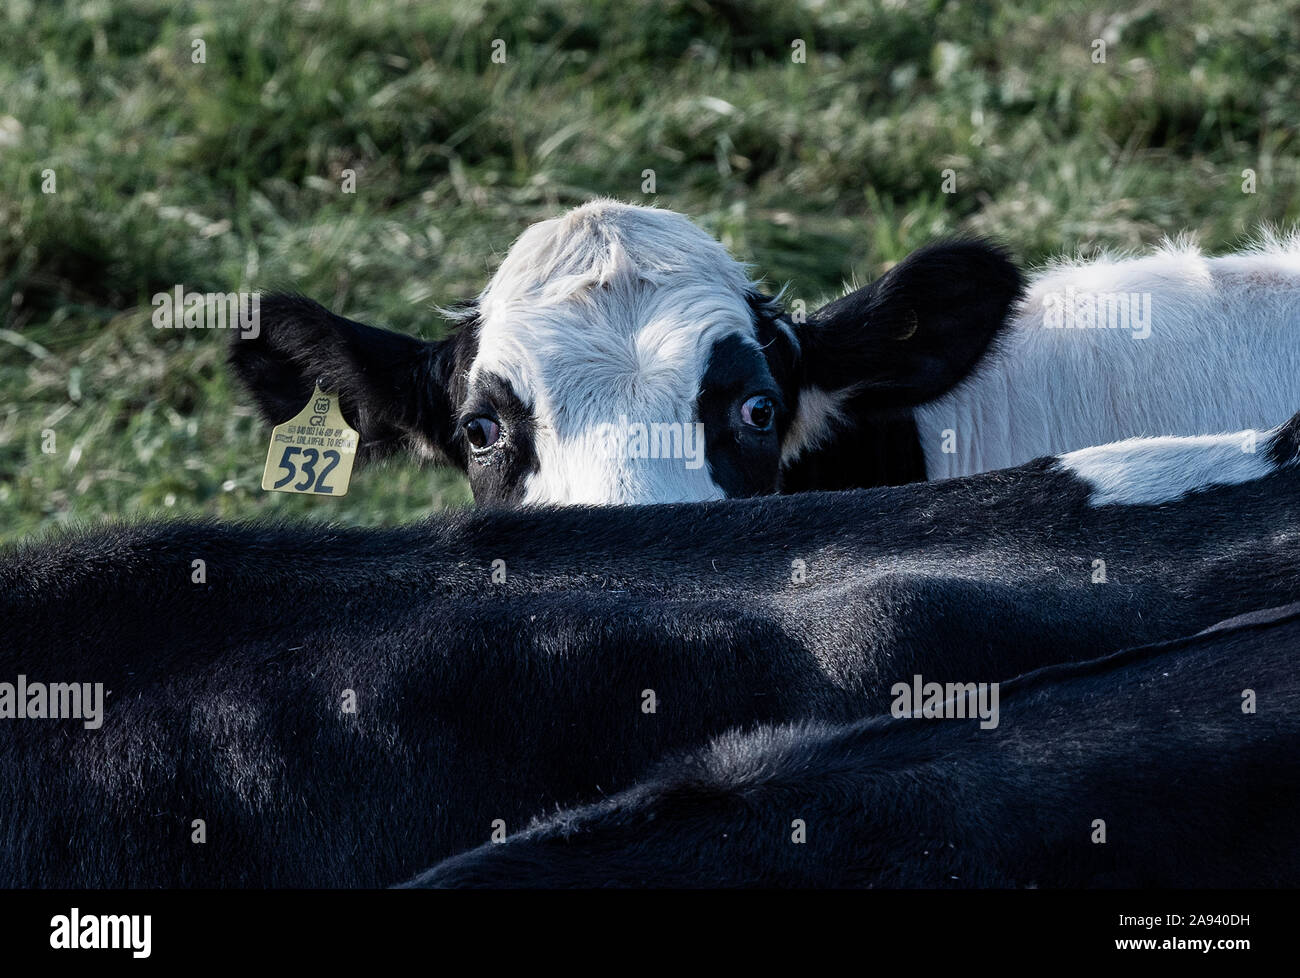 Curious dairy cow, Haverhill, New Hampshire, USA. Stock Photo